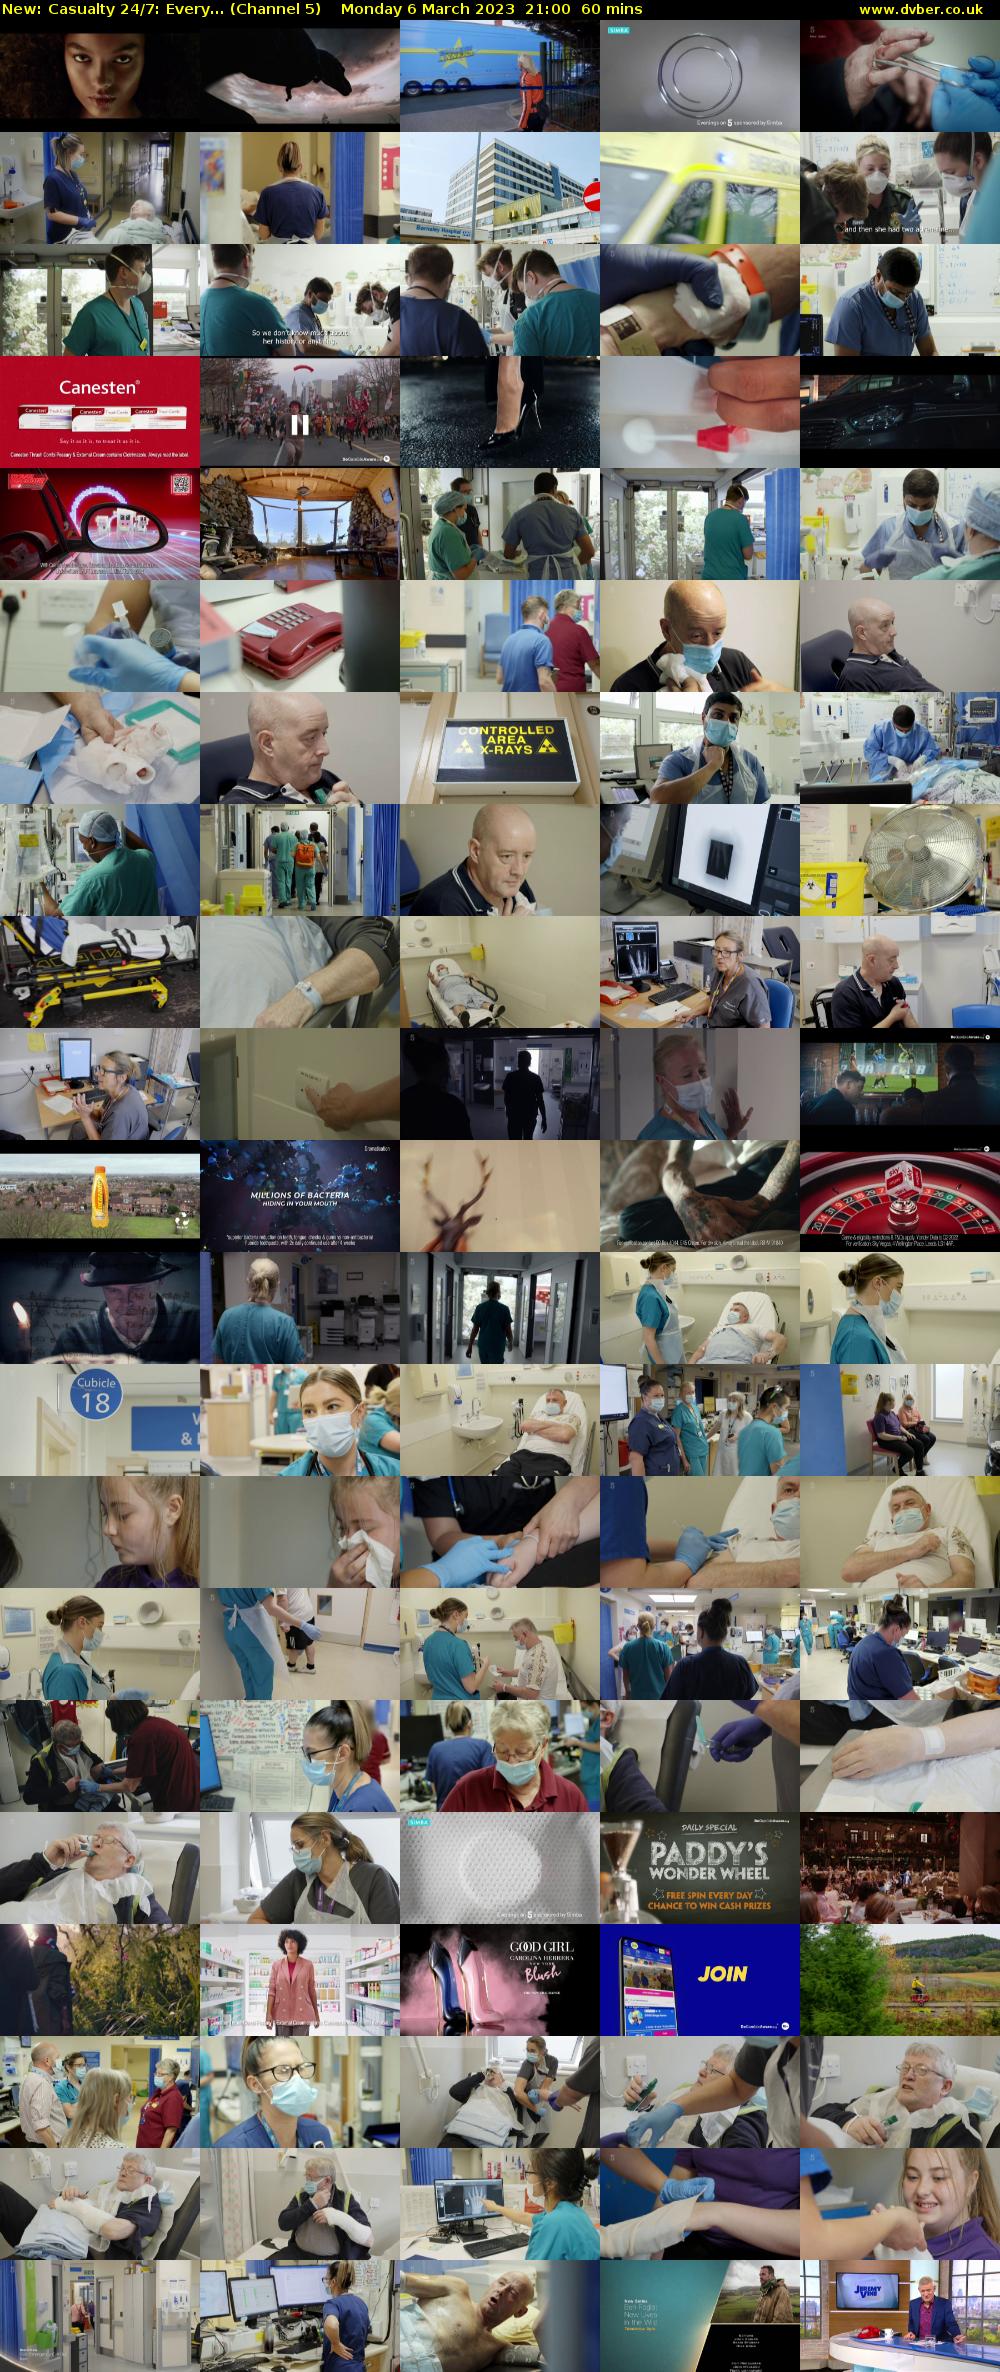 Casualty 24/7: Every... (Channel 5) Monday 6 March 2023 21:00 - 22:00